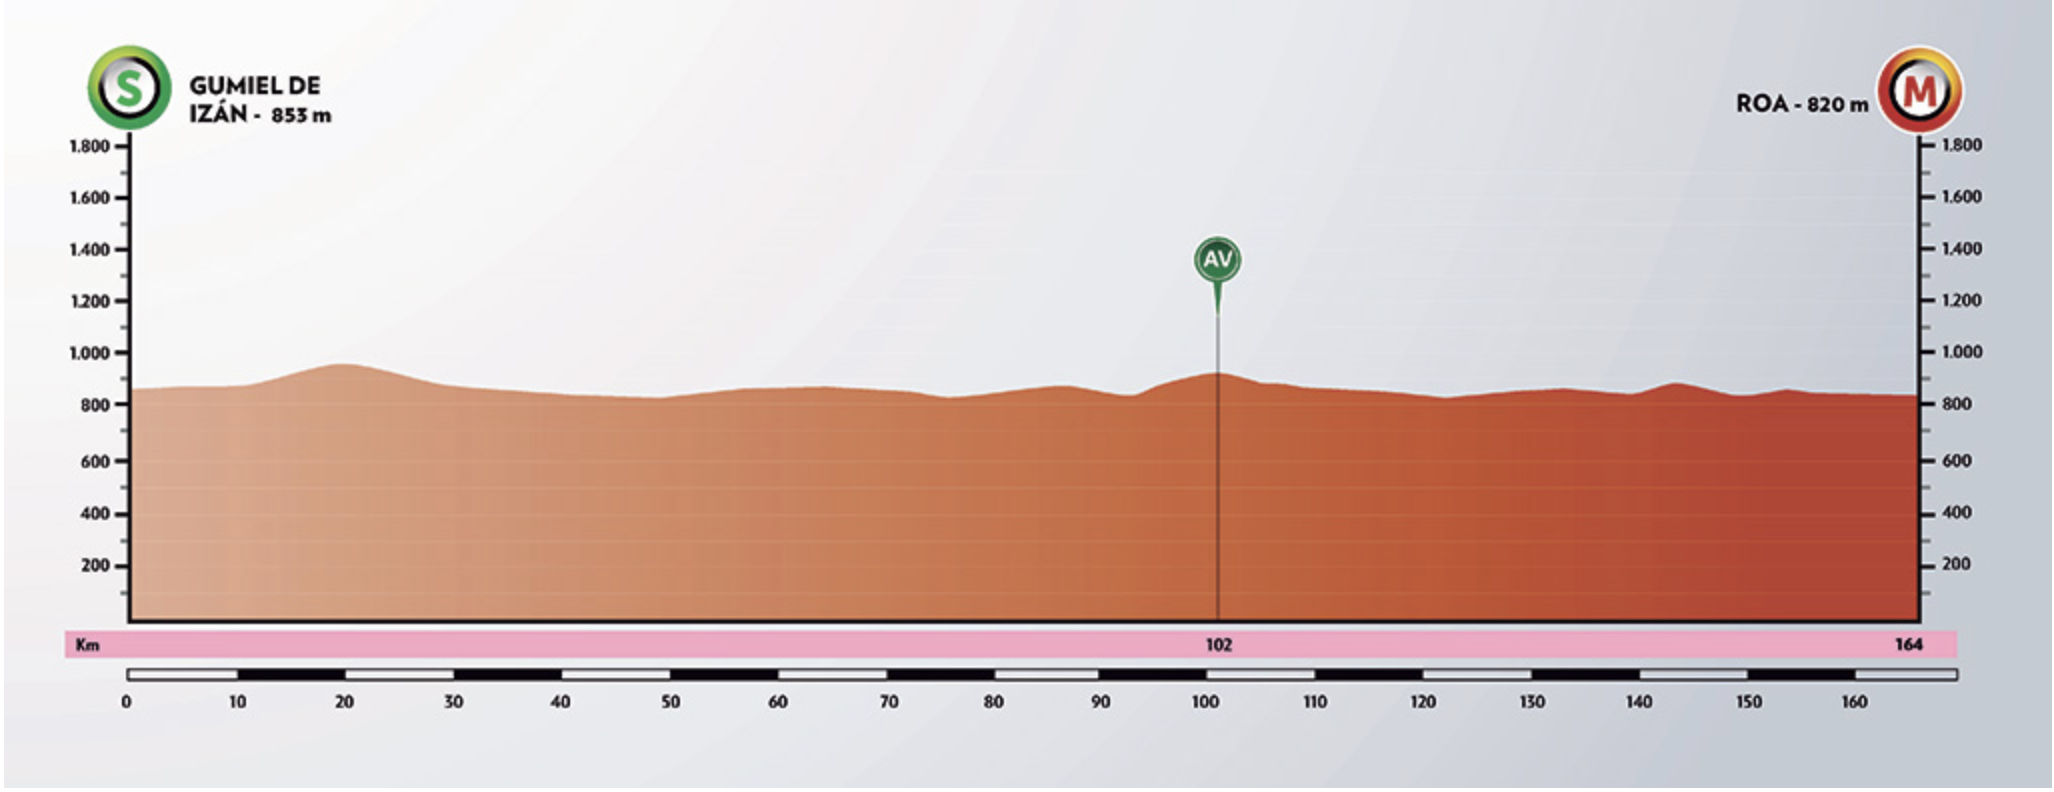 Here is today's stage profile. As you can see it's almost entirely flat but there is a short kick to the line in closing stages, so it's not an easy one for the sprinters. They're never easy but you know what I'm getting at.